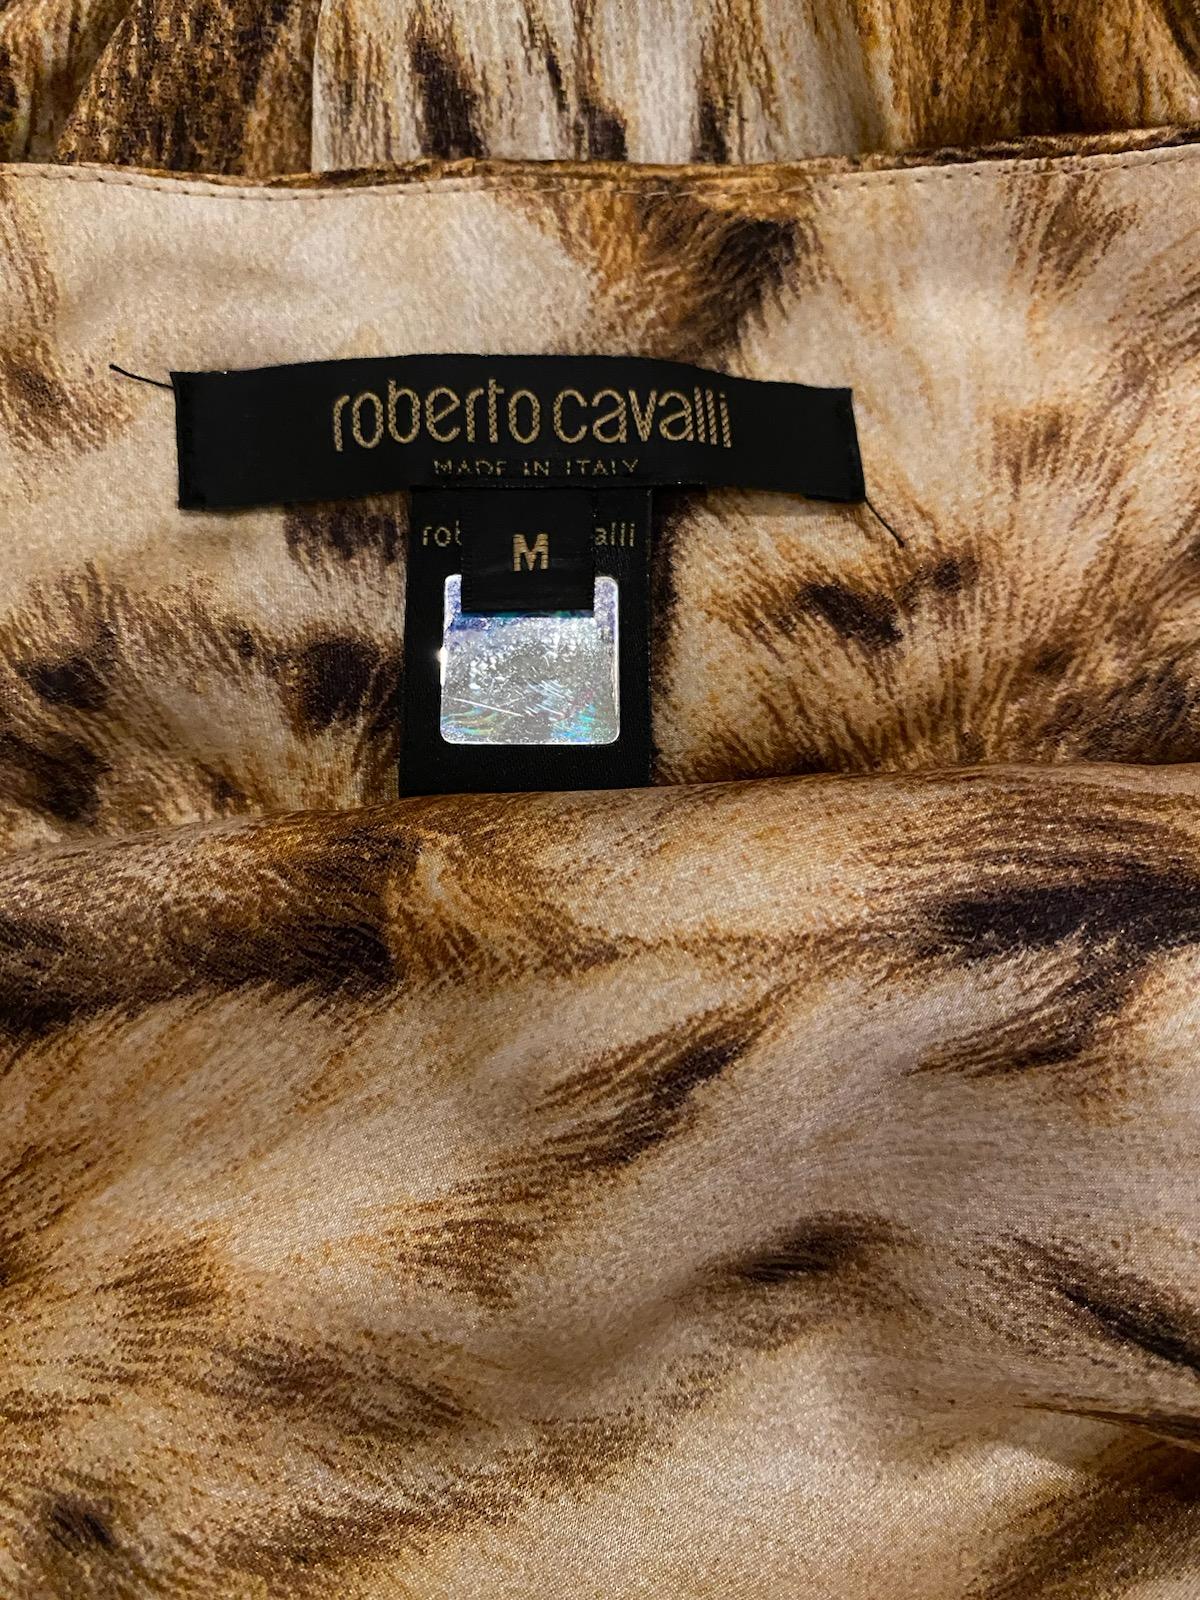 Roberto Cavalli Vintage Gold Leopard Evening Gown Dress Fall/Winter 2003 Size M In Good Condition For Sale In Saint Petersburg, FL